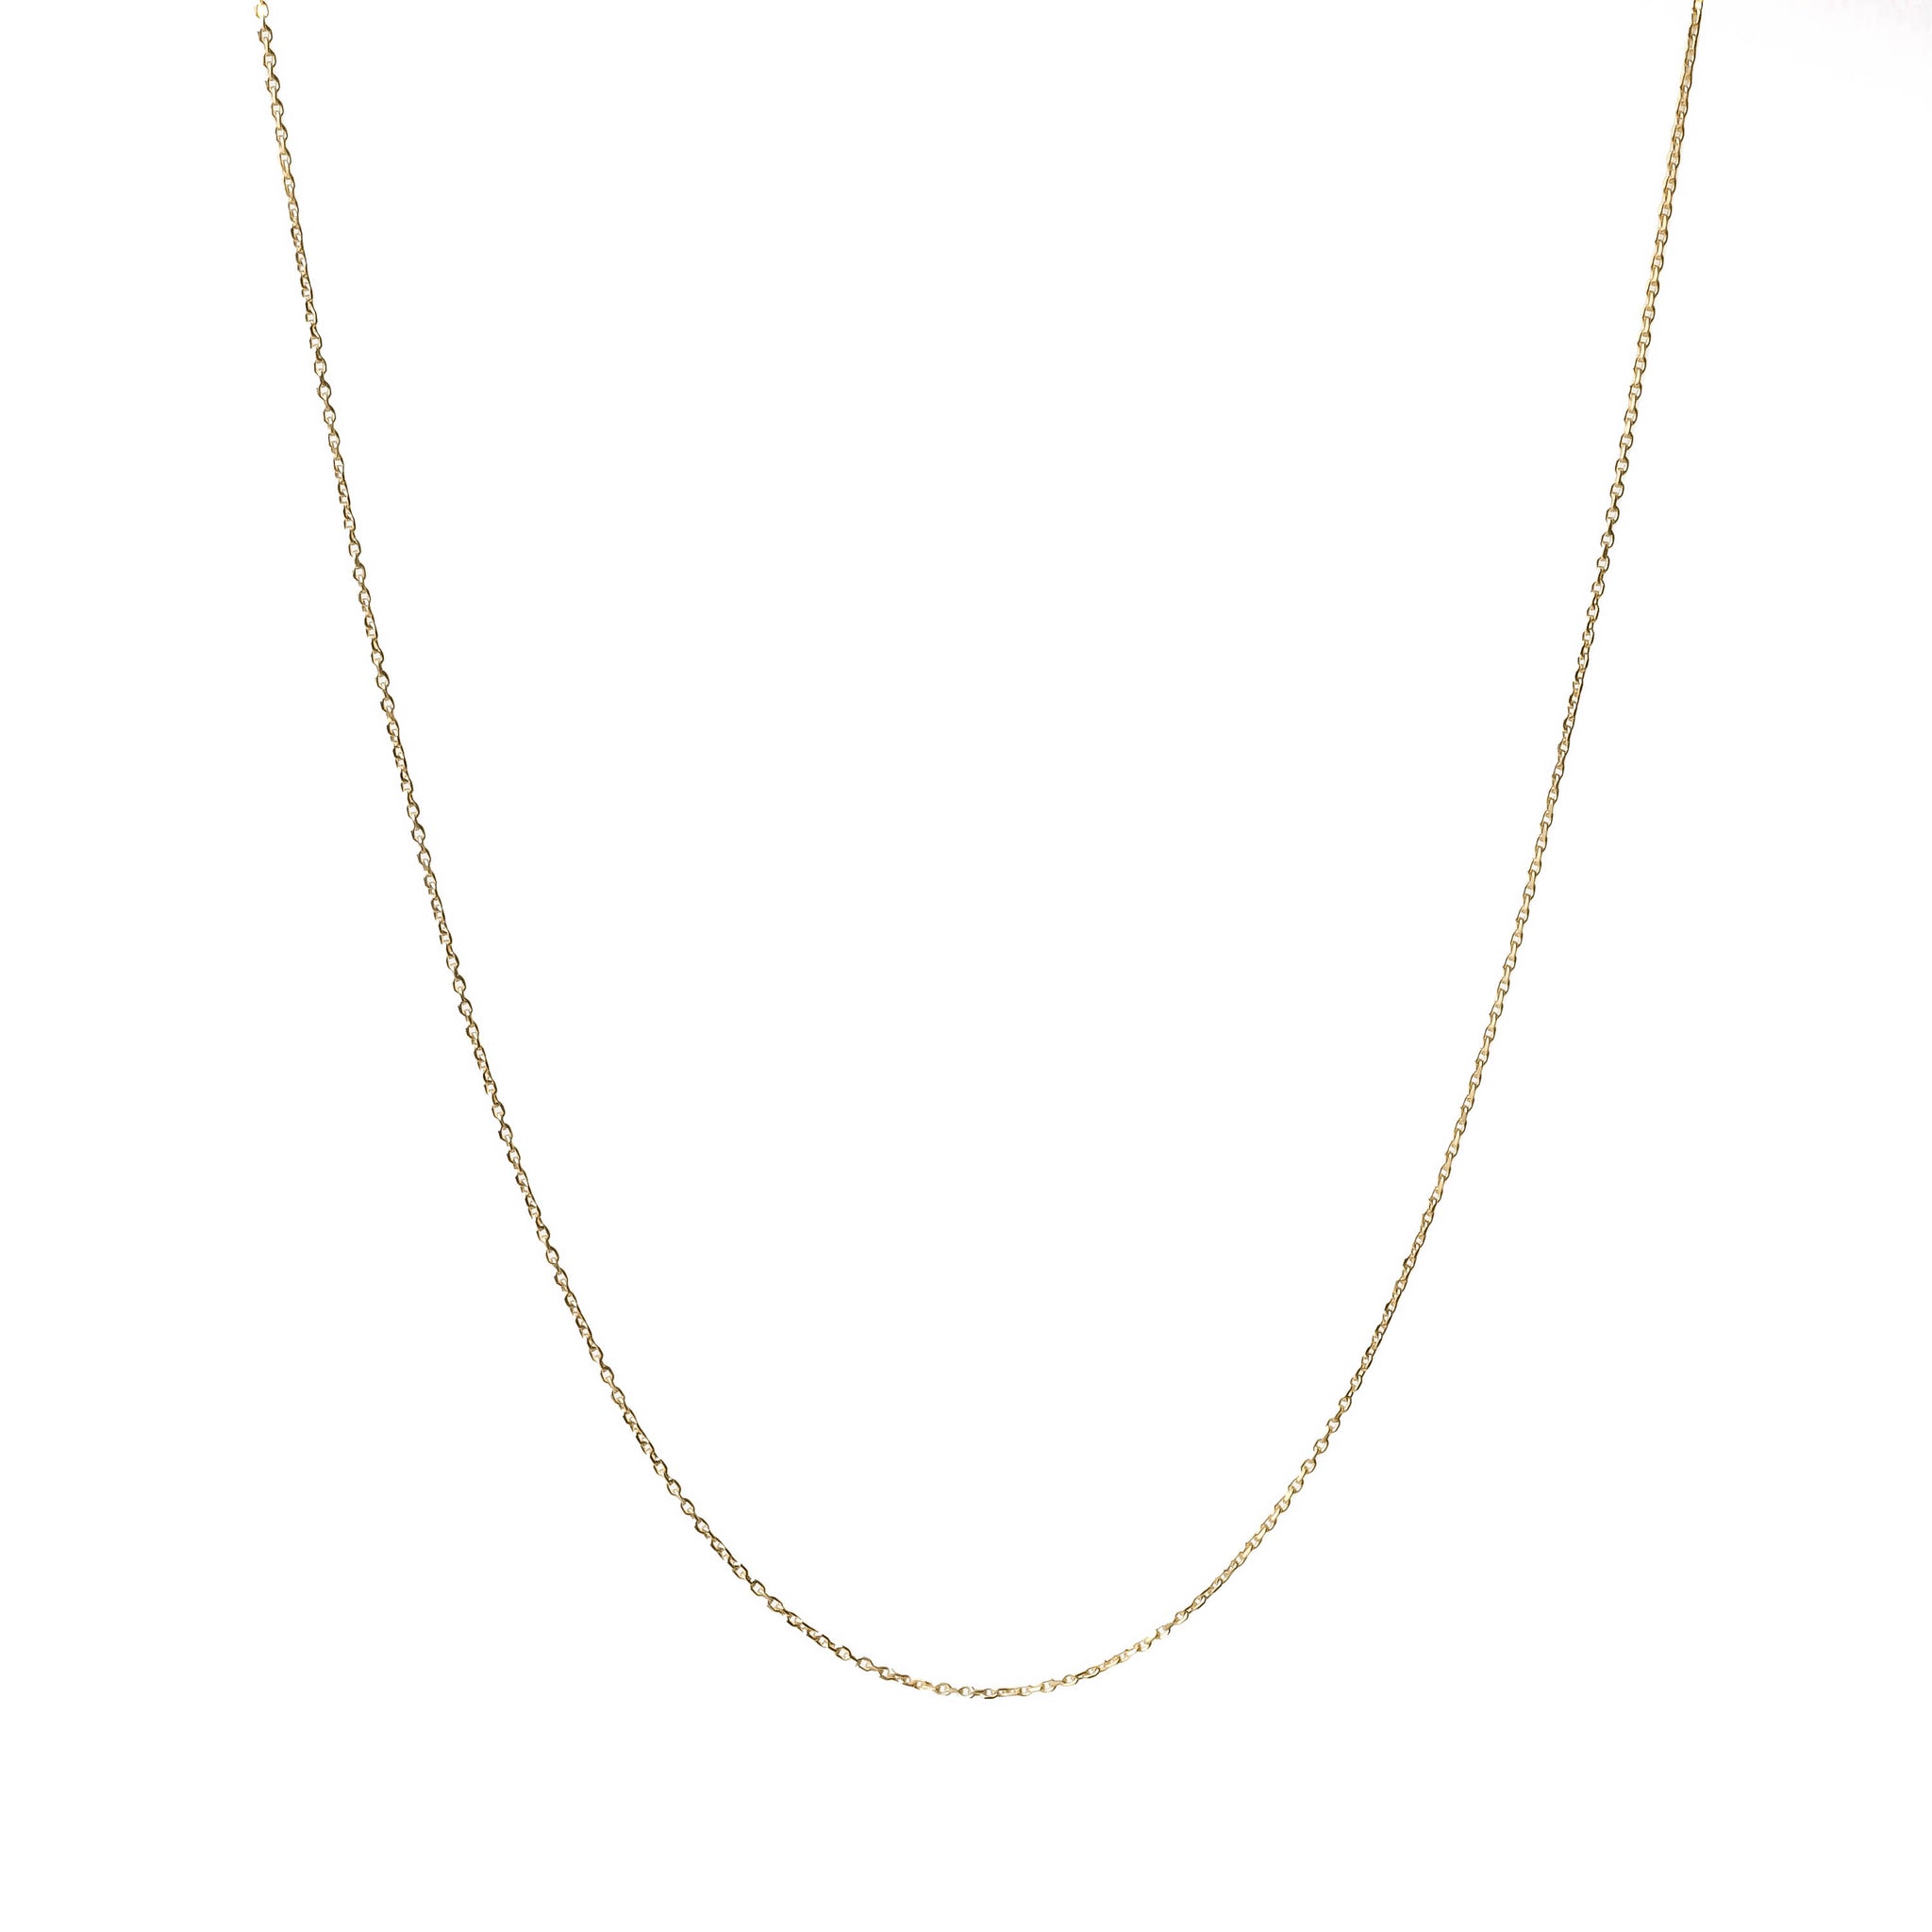 Thin gold chain necklace